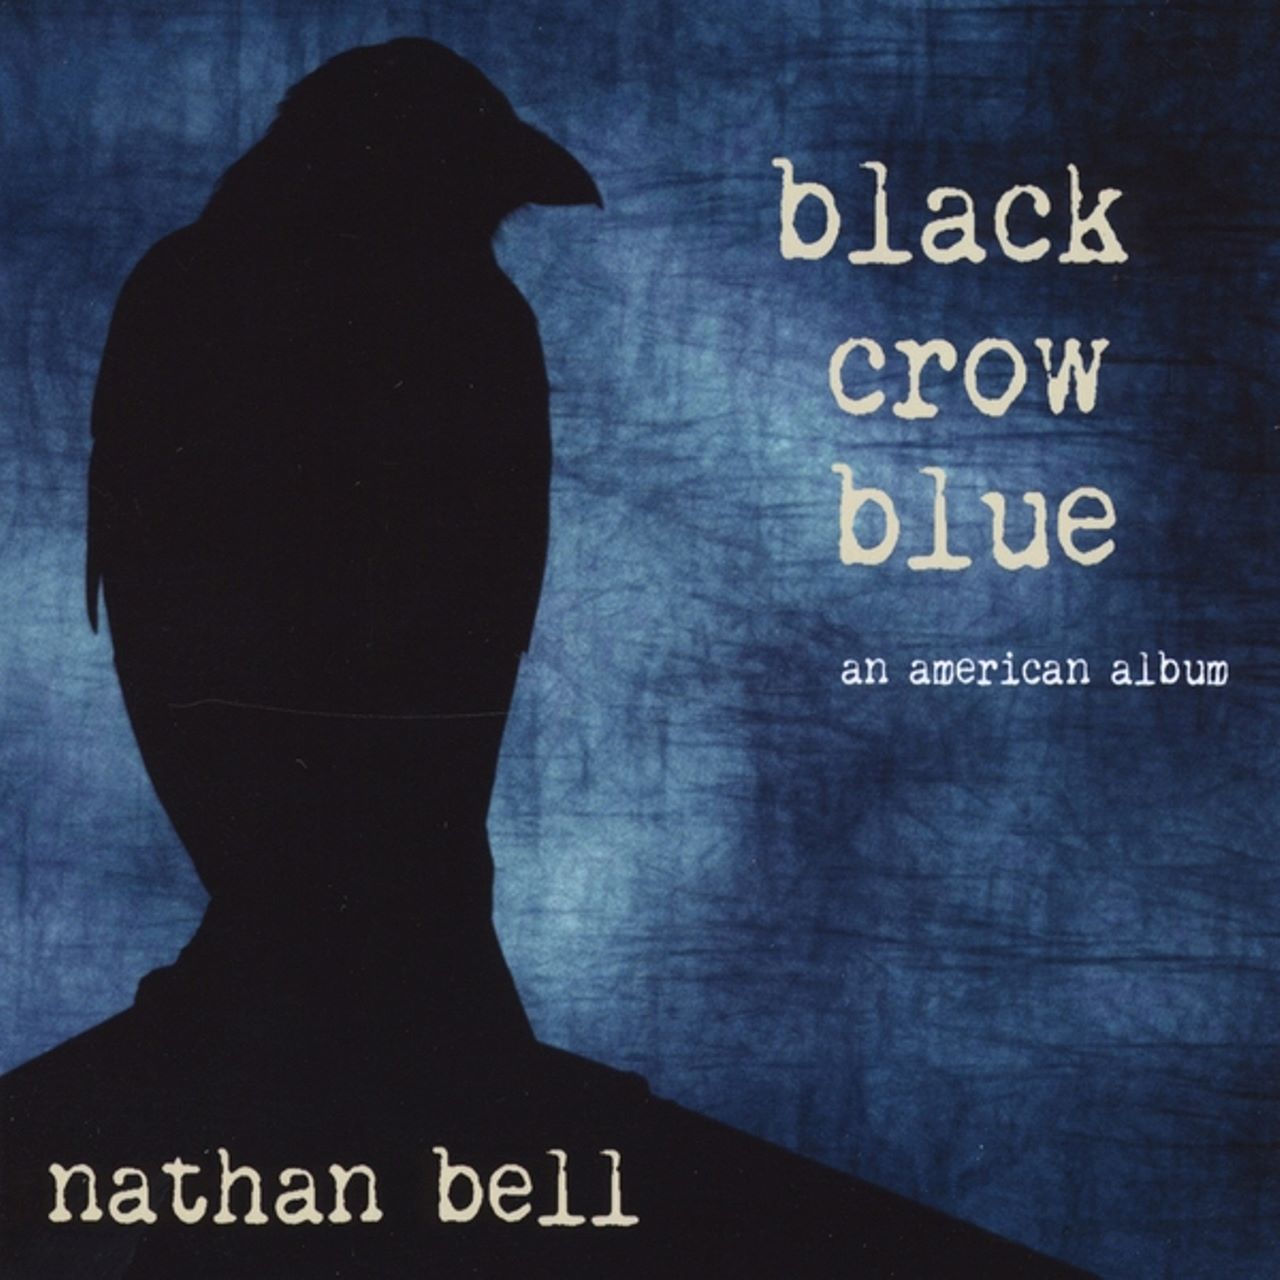 Nathan Bell - Black Crow Blue cover album